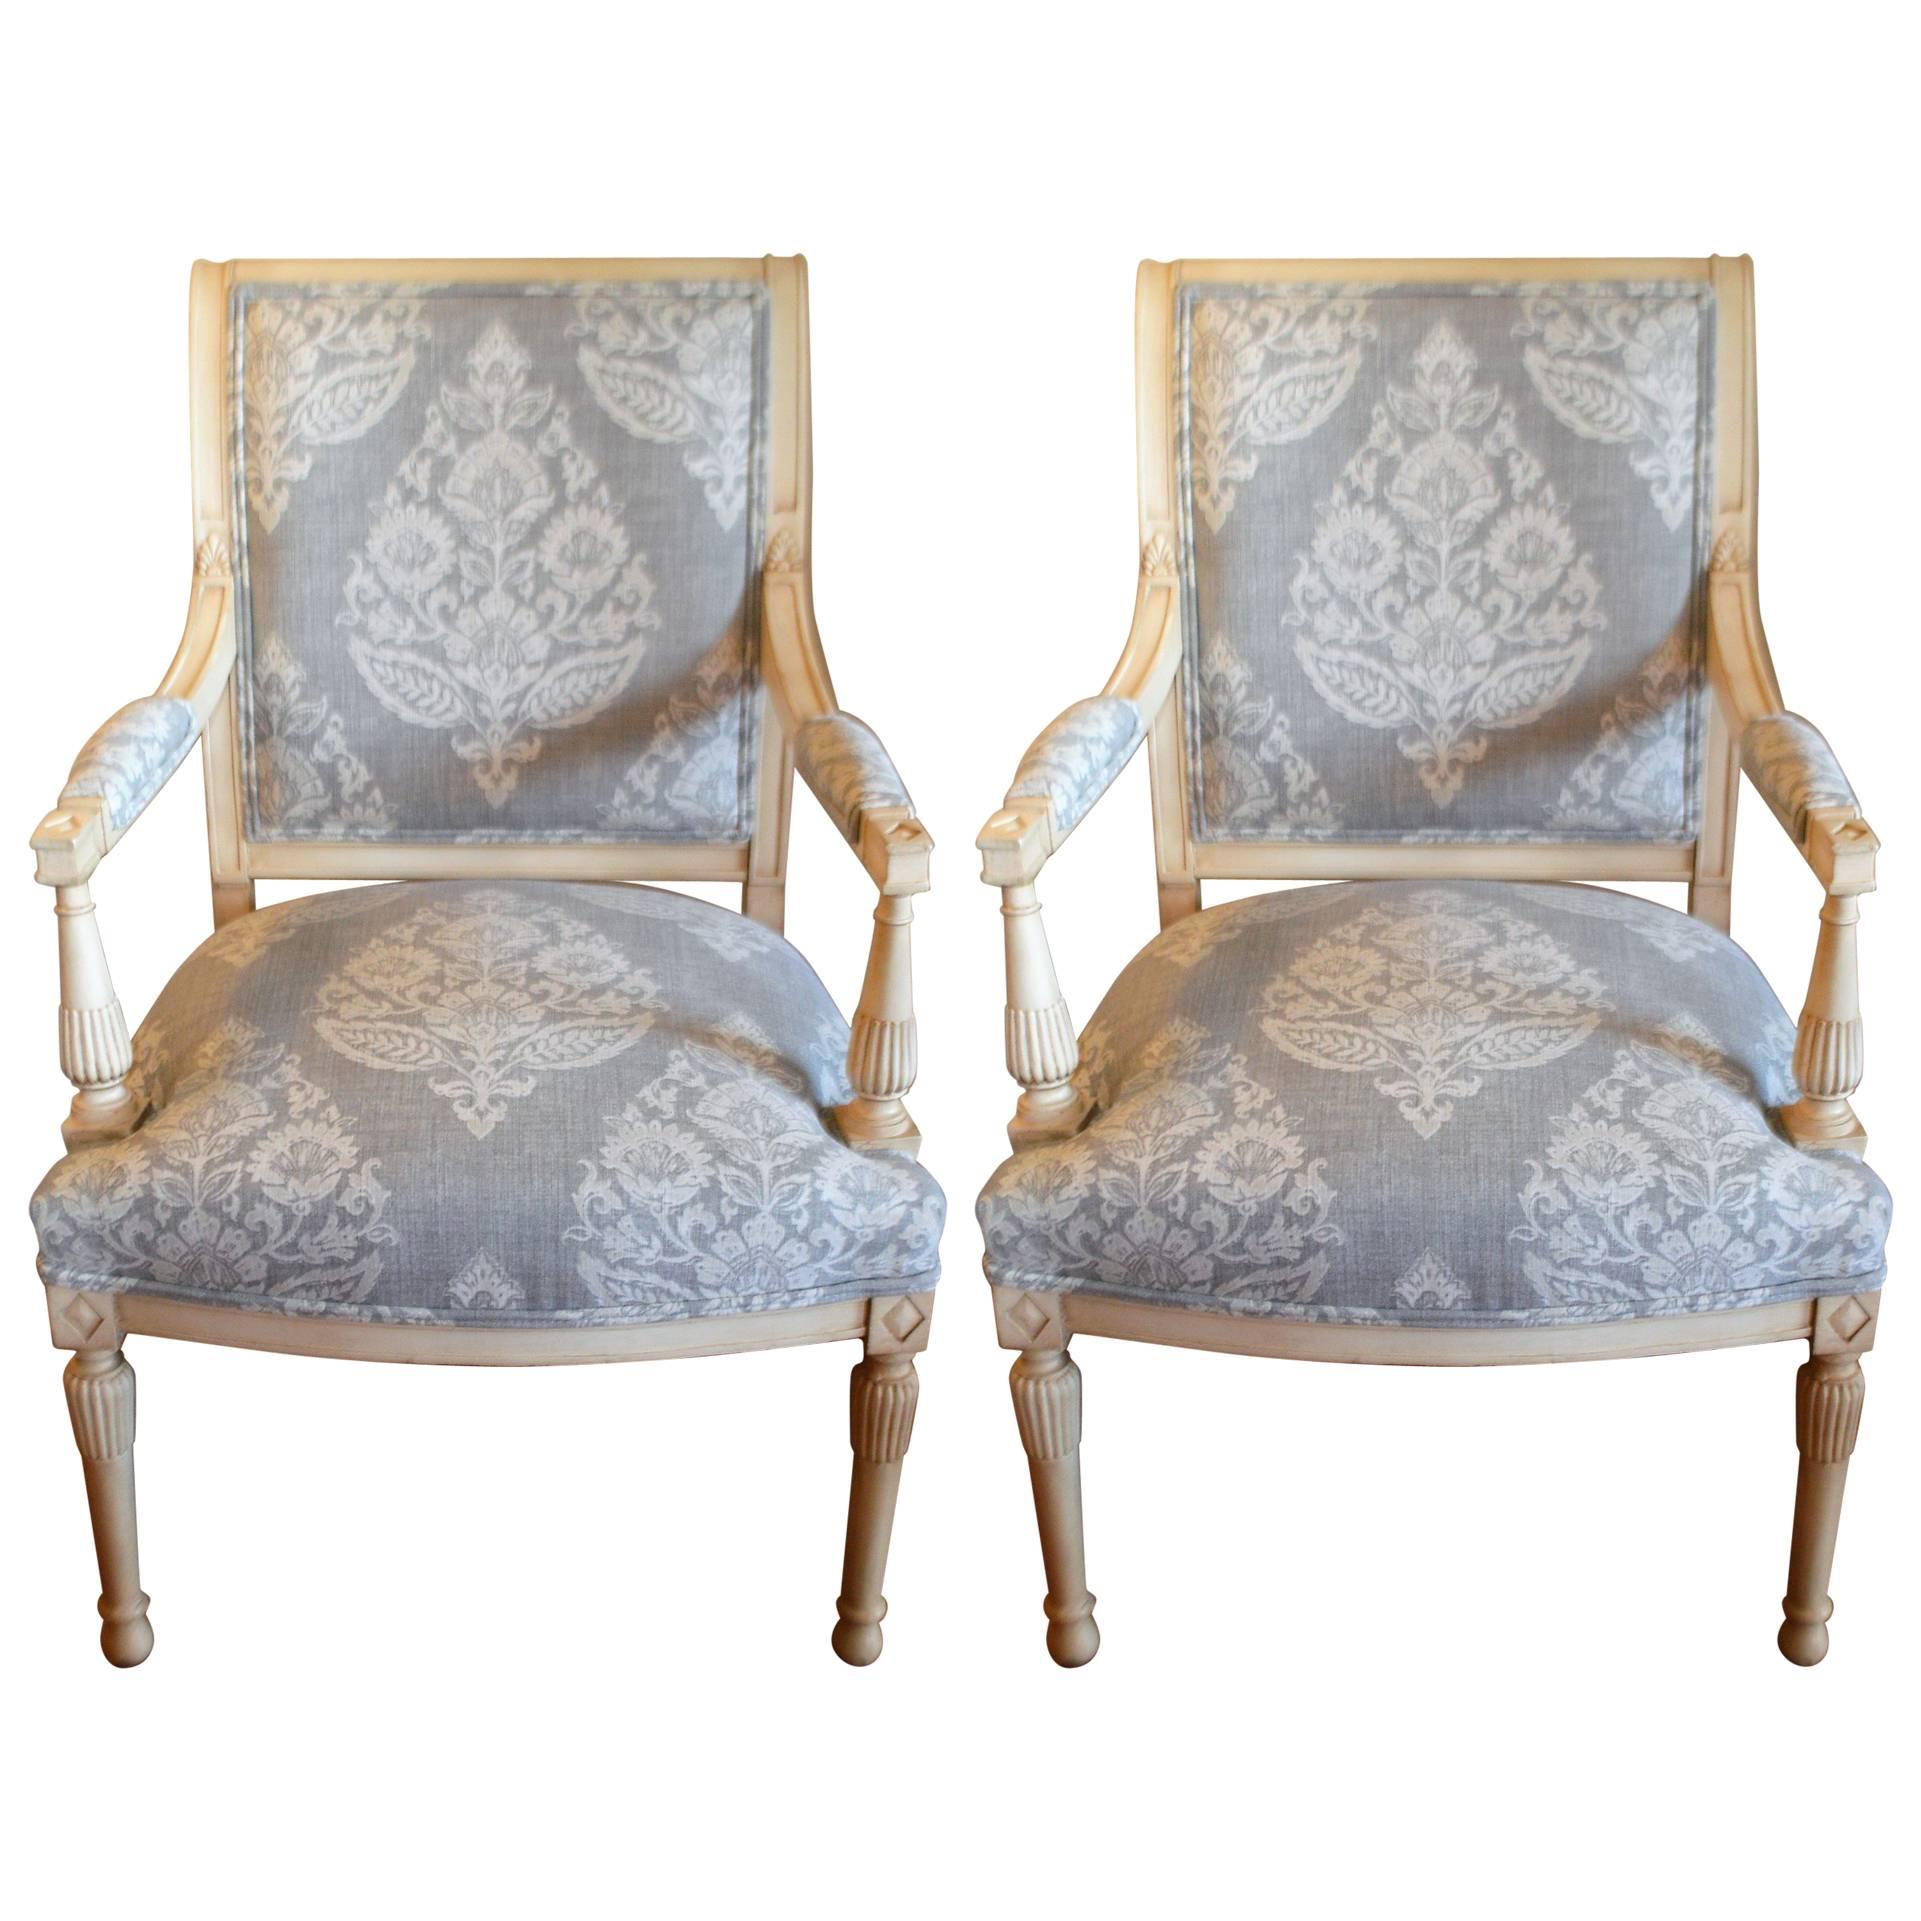 Pair of Gustavian Painted Armchairs Newly Upholstered in a Grey Damask Pattern For Sale